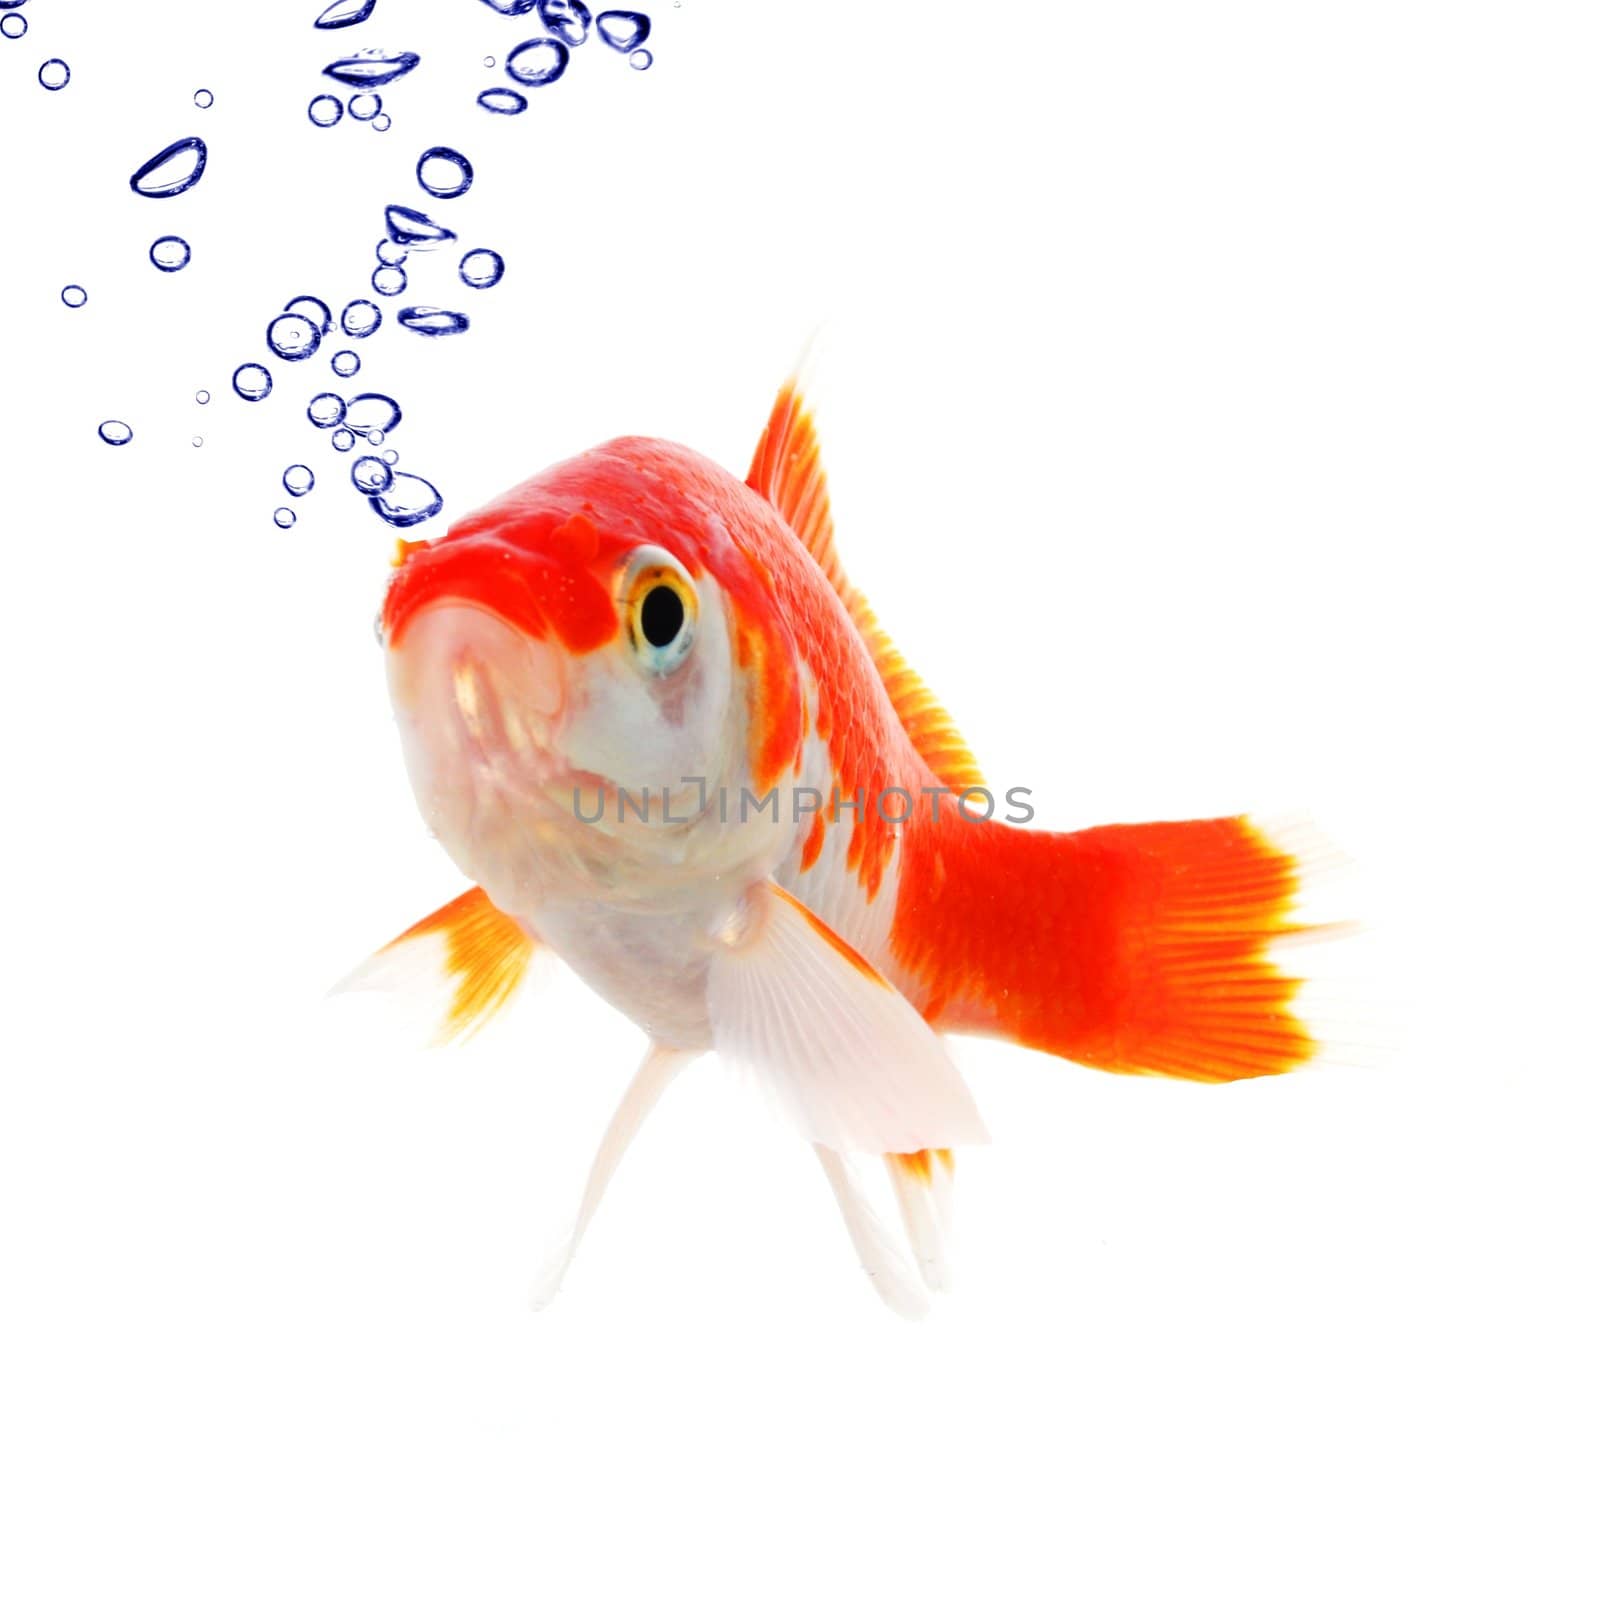 goldfish in water with bubbles showing animal concept